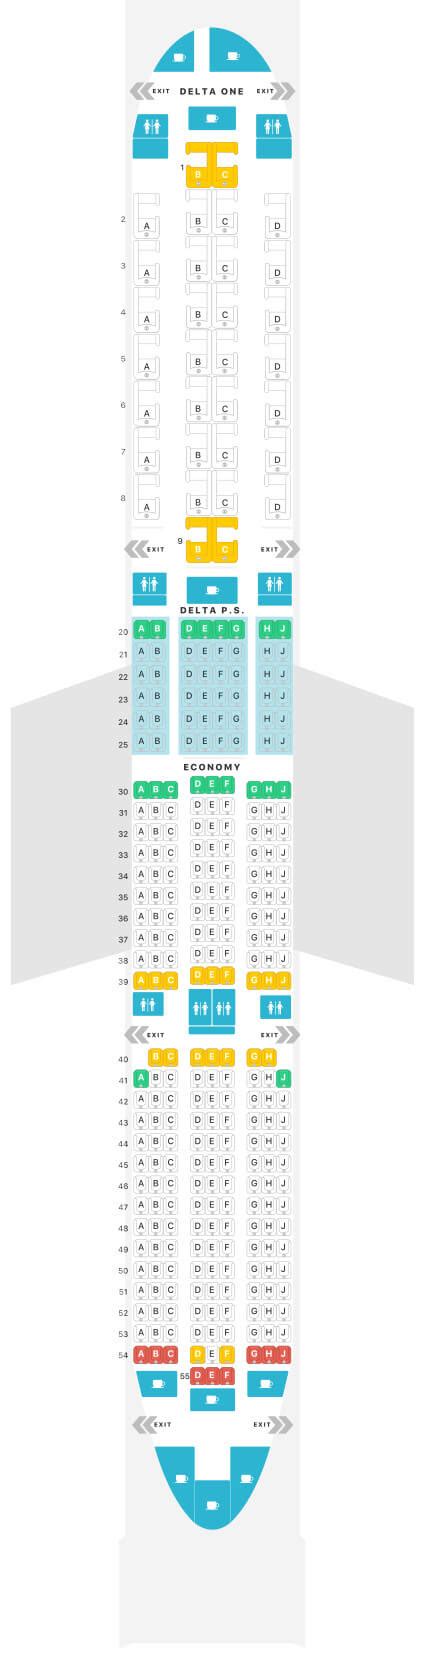 Delta Airlines Airbus A350 Seating Chart